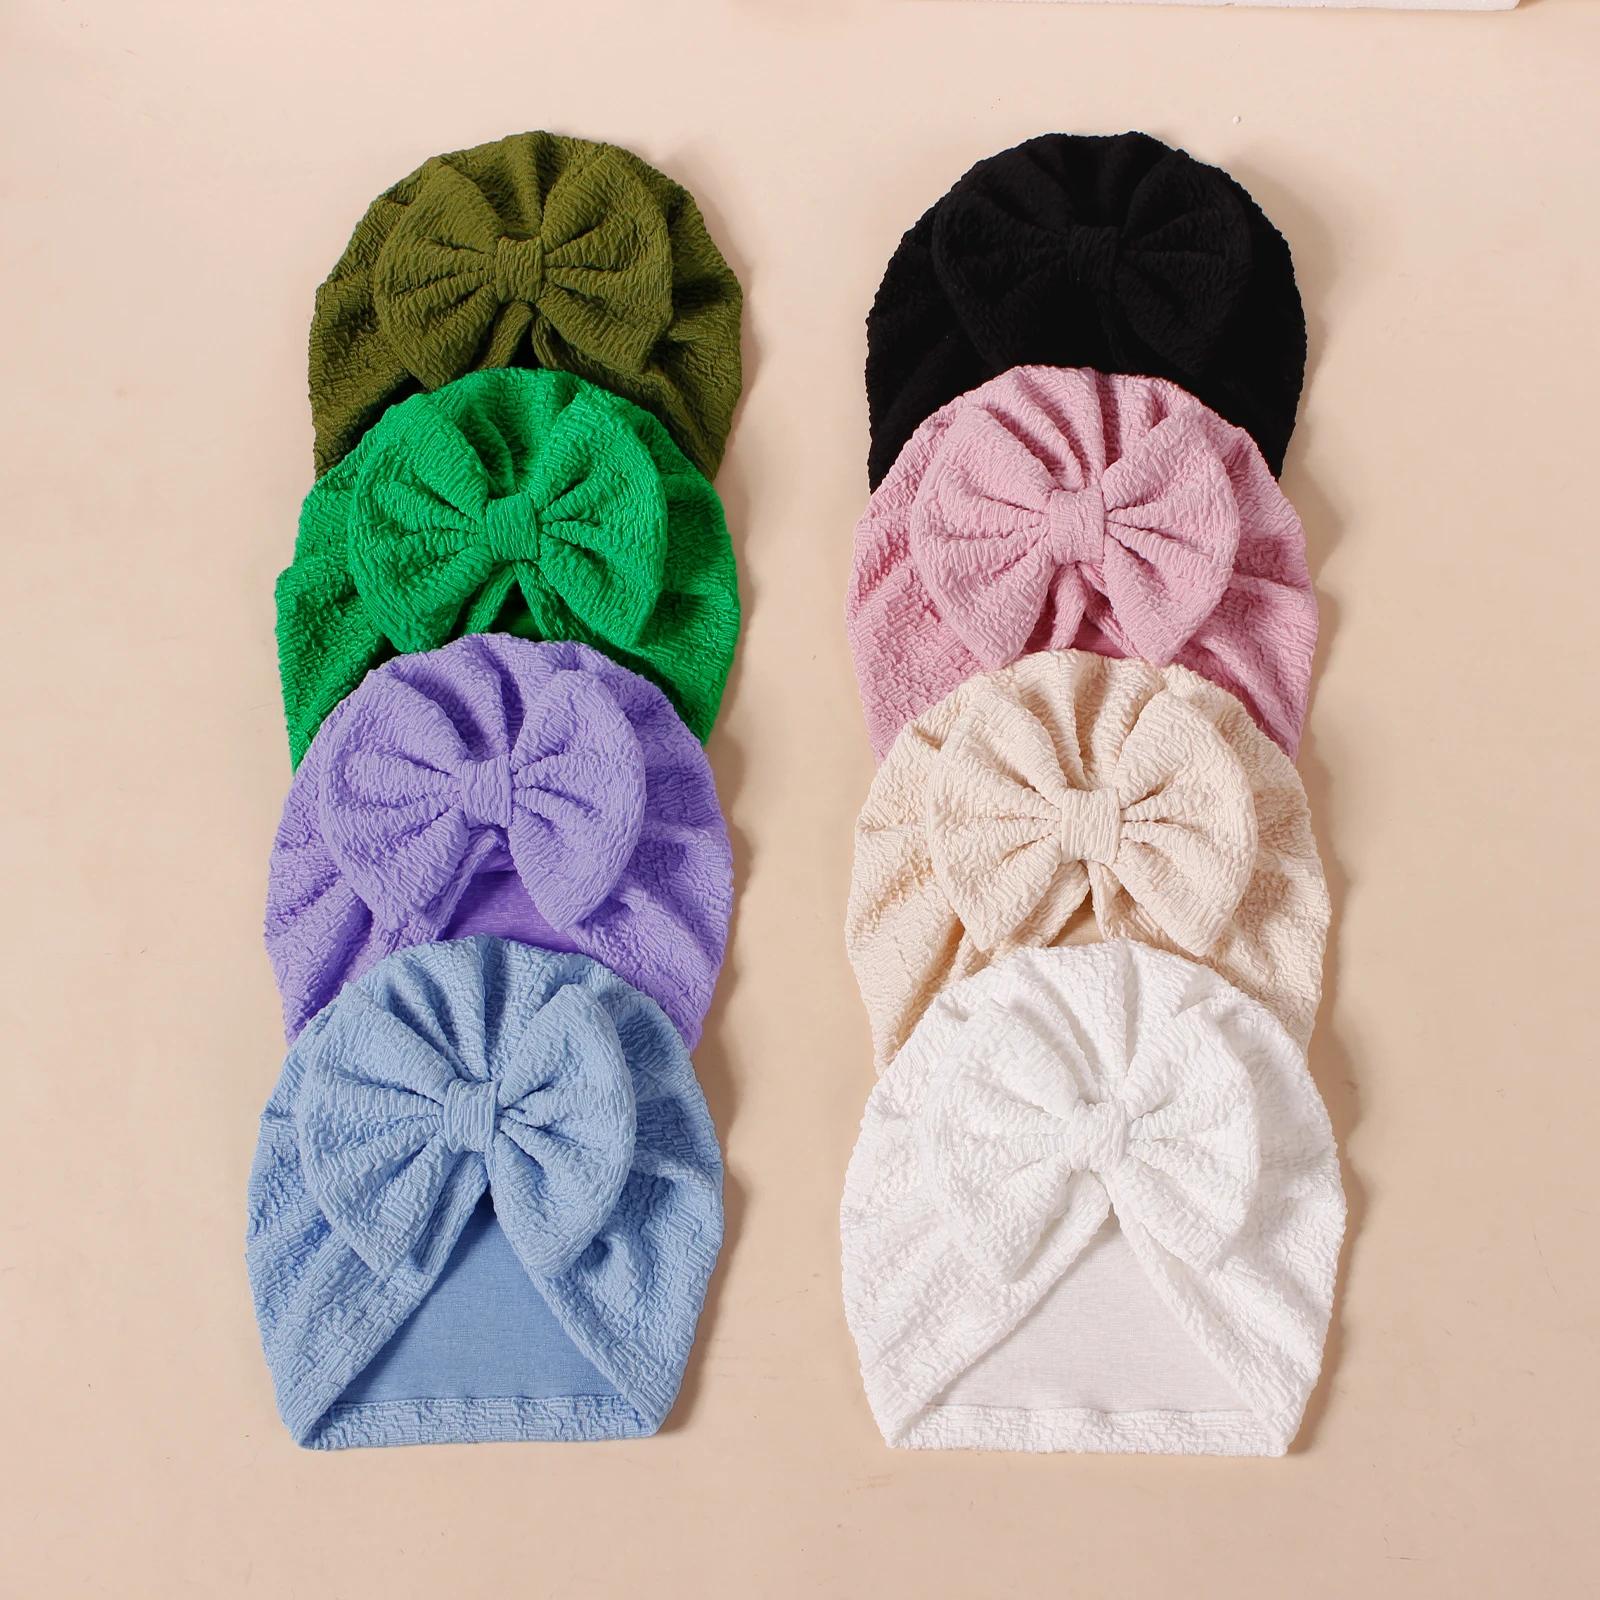 New Soft Cotton Bowknot Turban Babes Solid Color HeadWraps Solid Baby India Hat Kid Girl Infant Beanie Cap Toddler Baby Headwear 2023 fashion korean baby knit pompom hat winter warm beanie cap for toddler boy girl korean solid color kids crochet bonnet